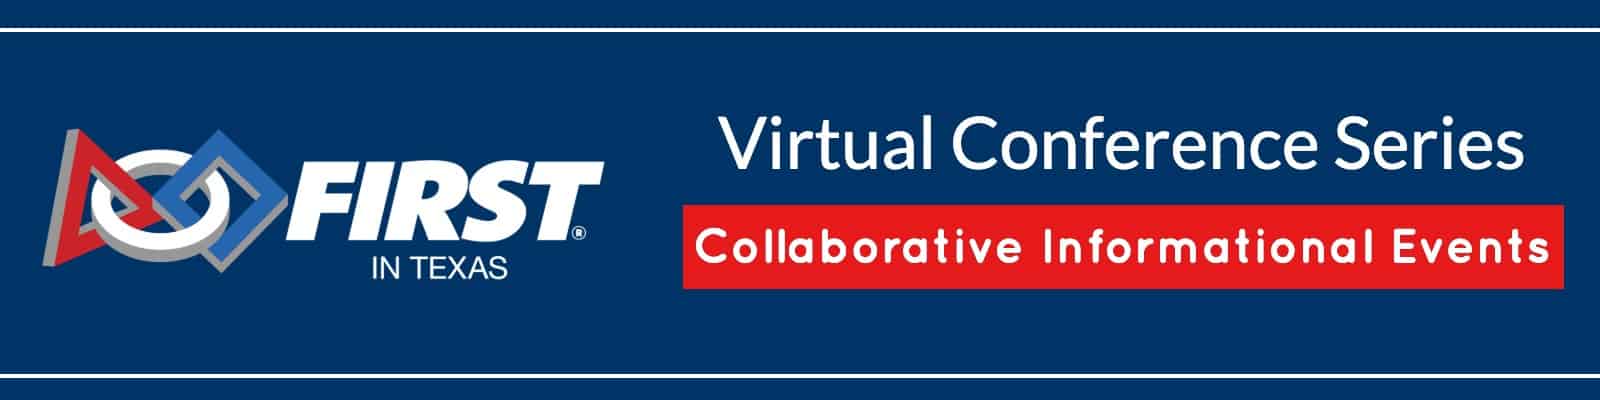 FIRST in Texas Virtual Conference Series: Collaborative Informational Events header graphic